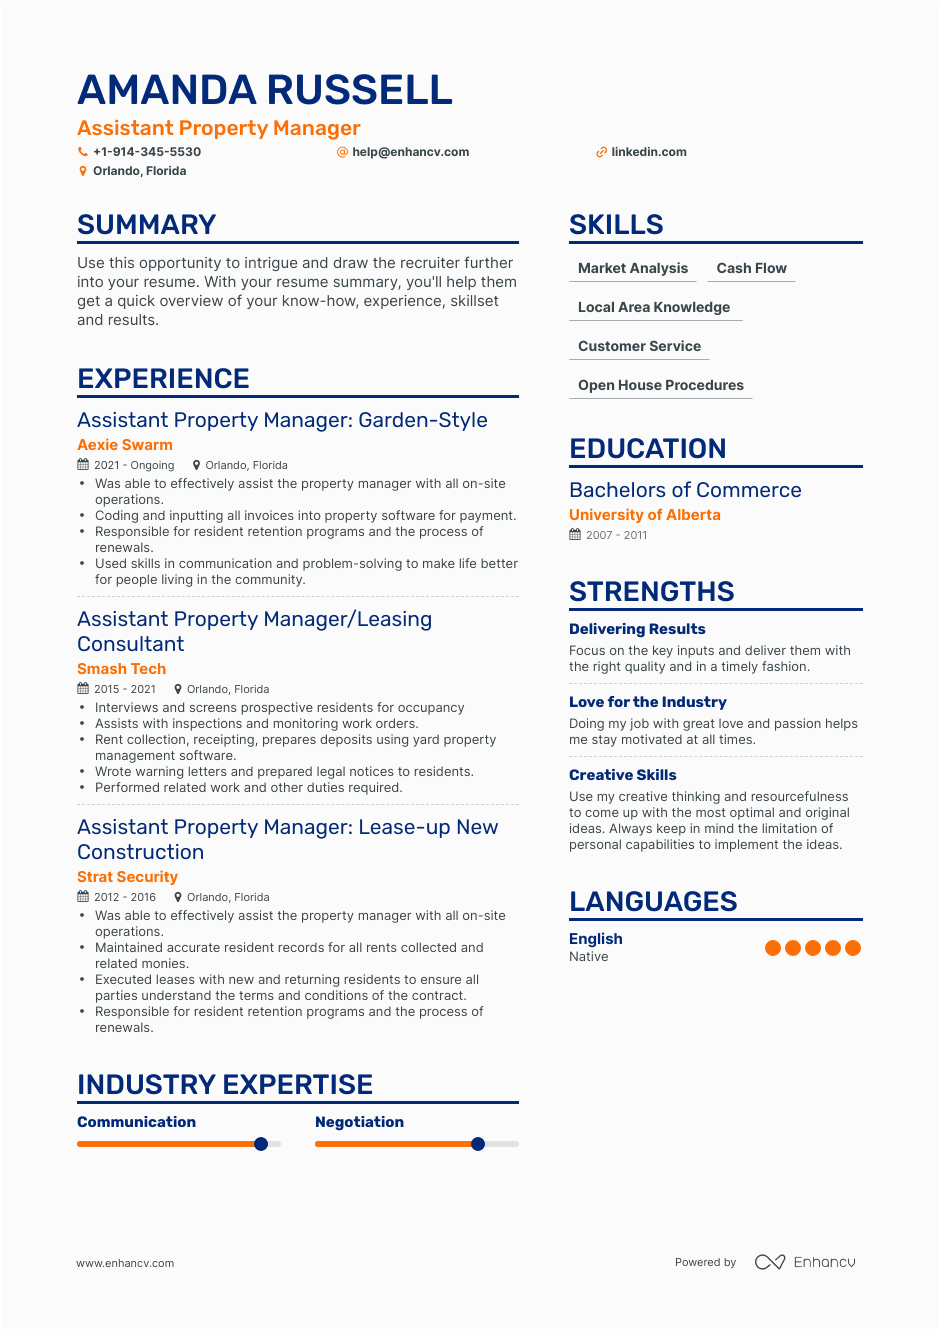 Sample Resume for assistant Property Manager Accomplishments assistant Property Manager Resume Examples & Guide for 2022 Layout